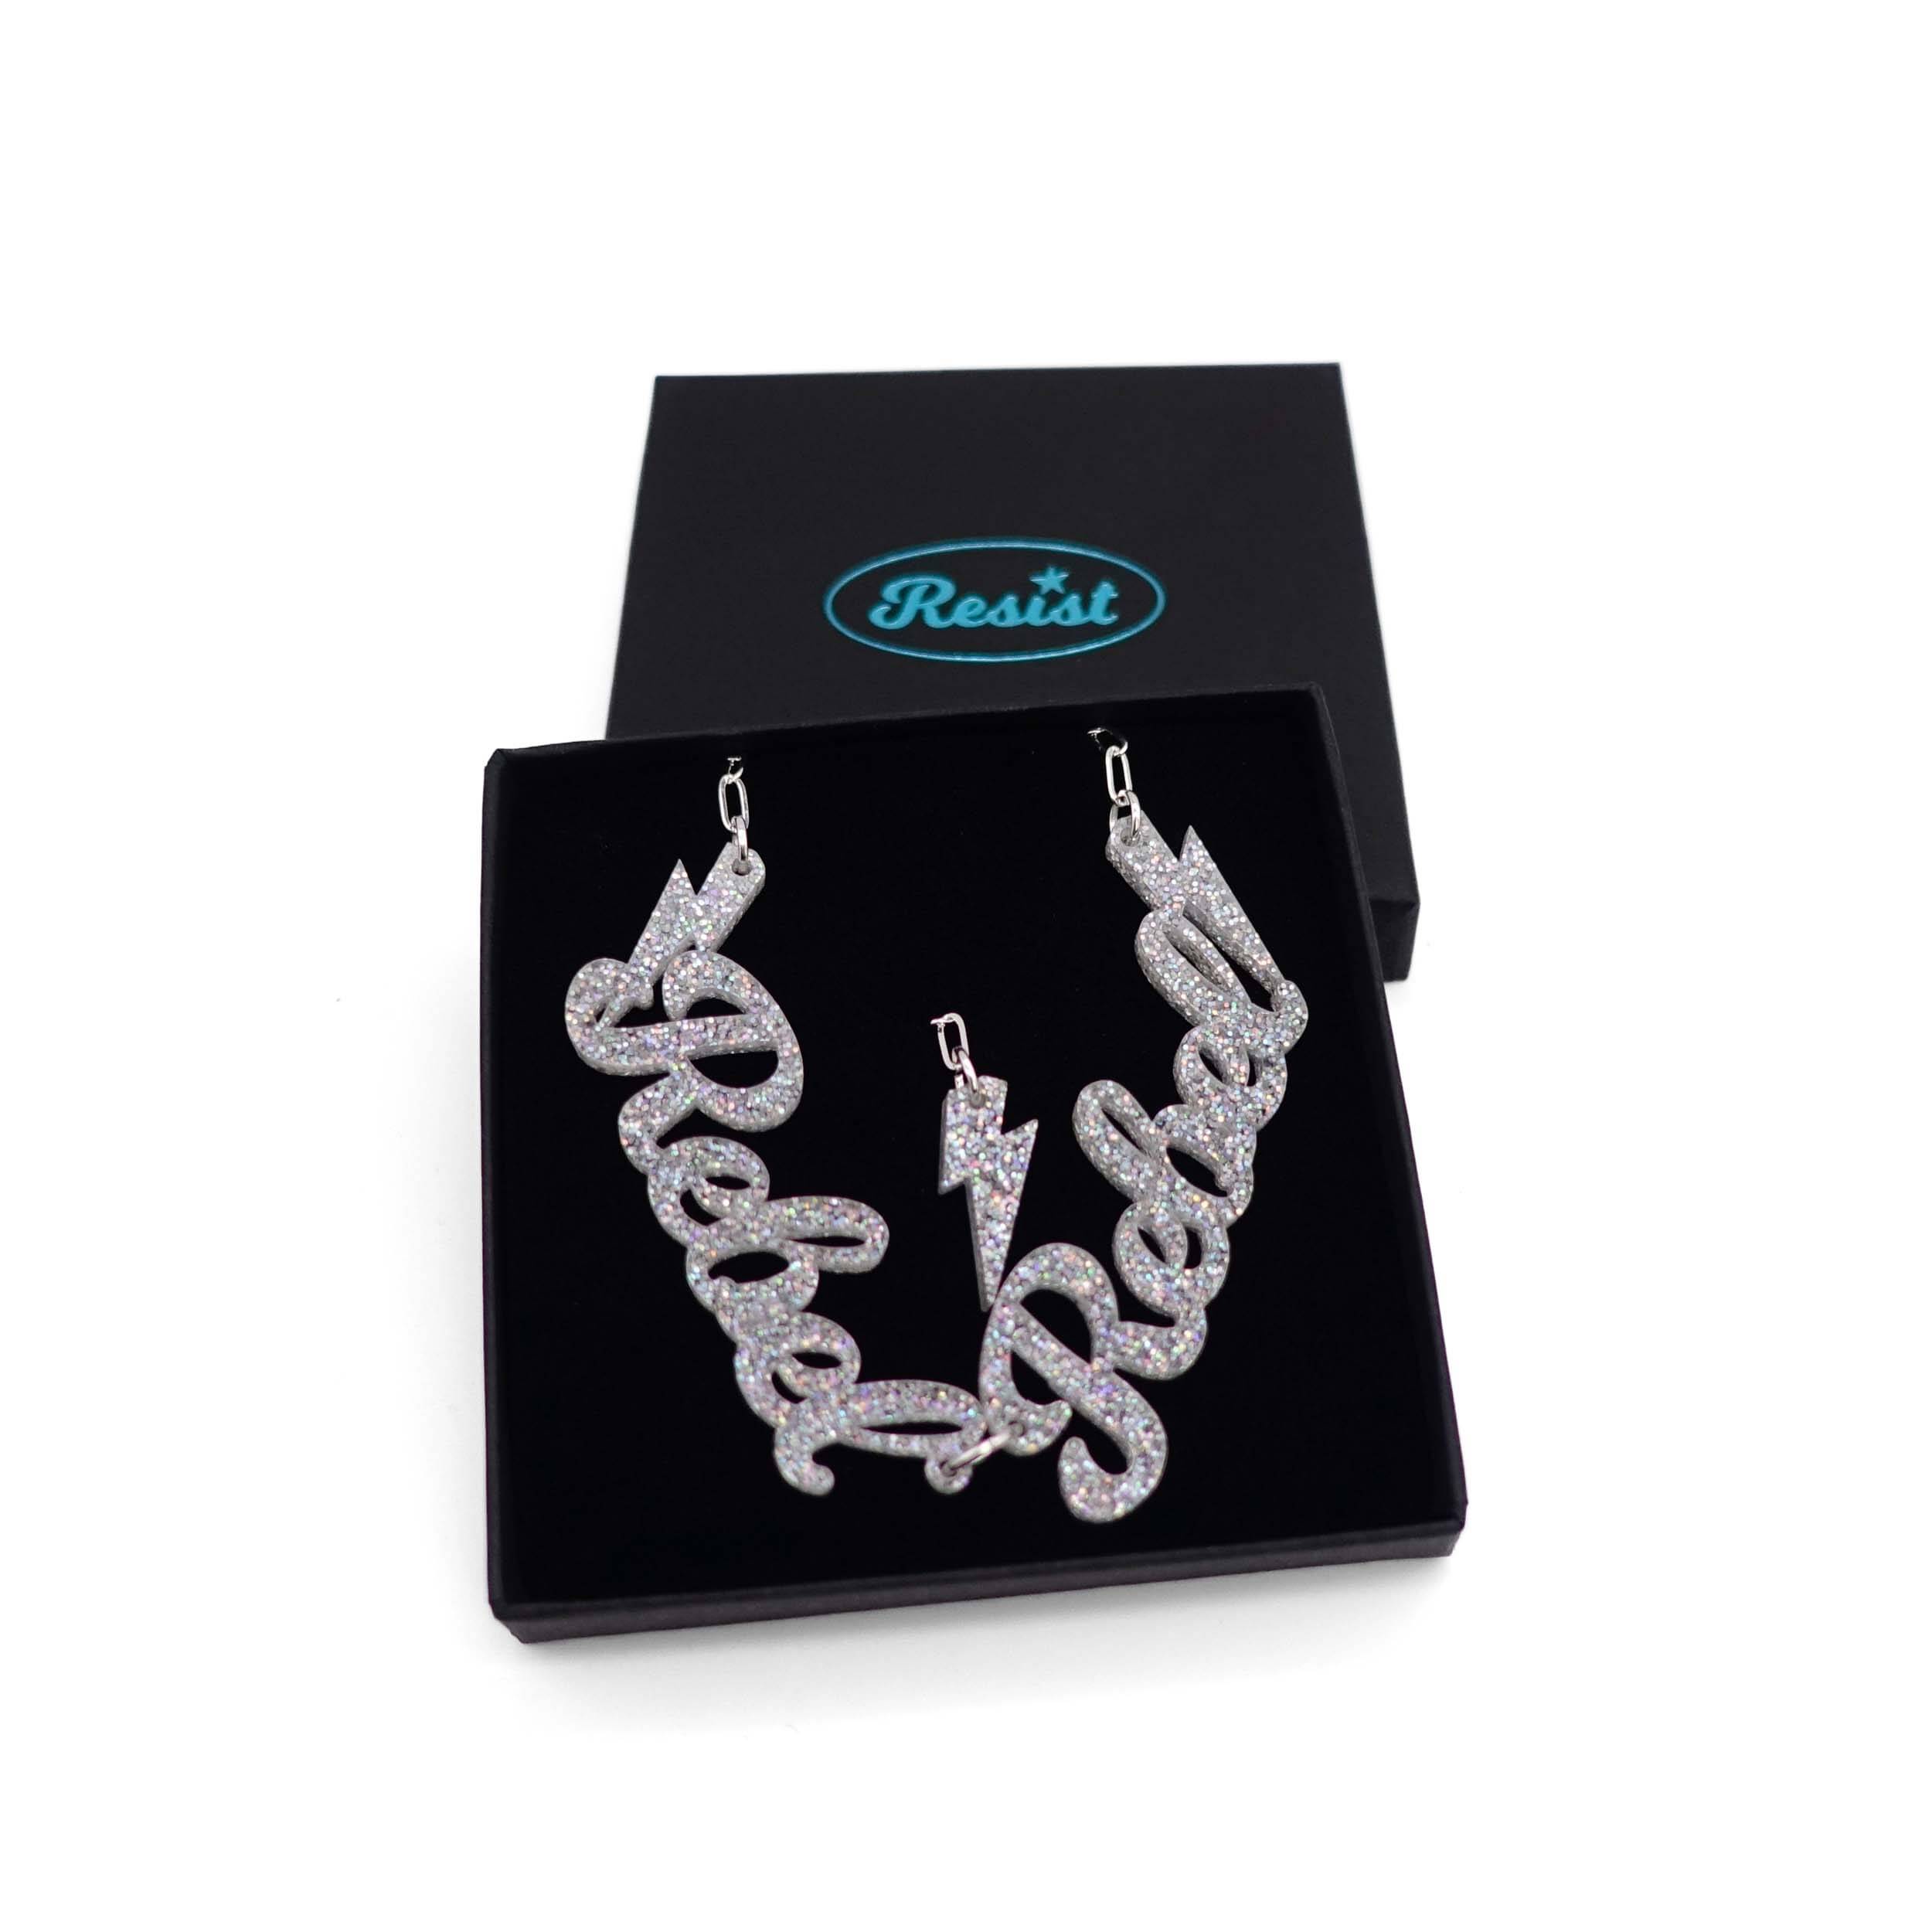 Silver glitter Rebel Rebel necklace shown in a Wear and Resist gift box. 